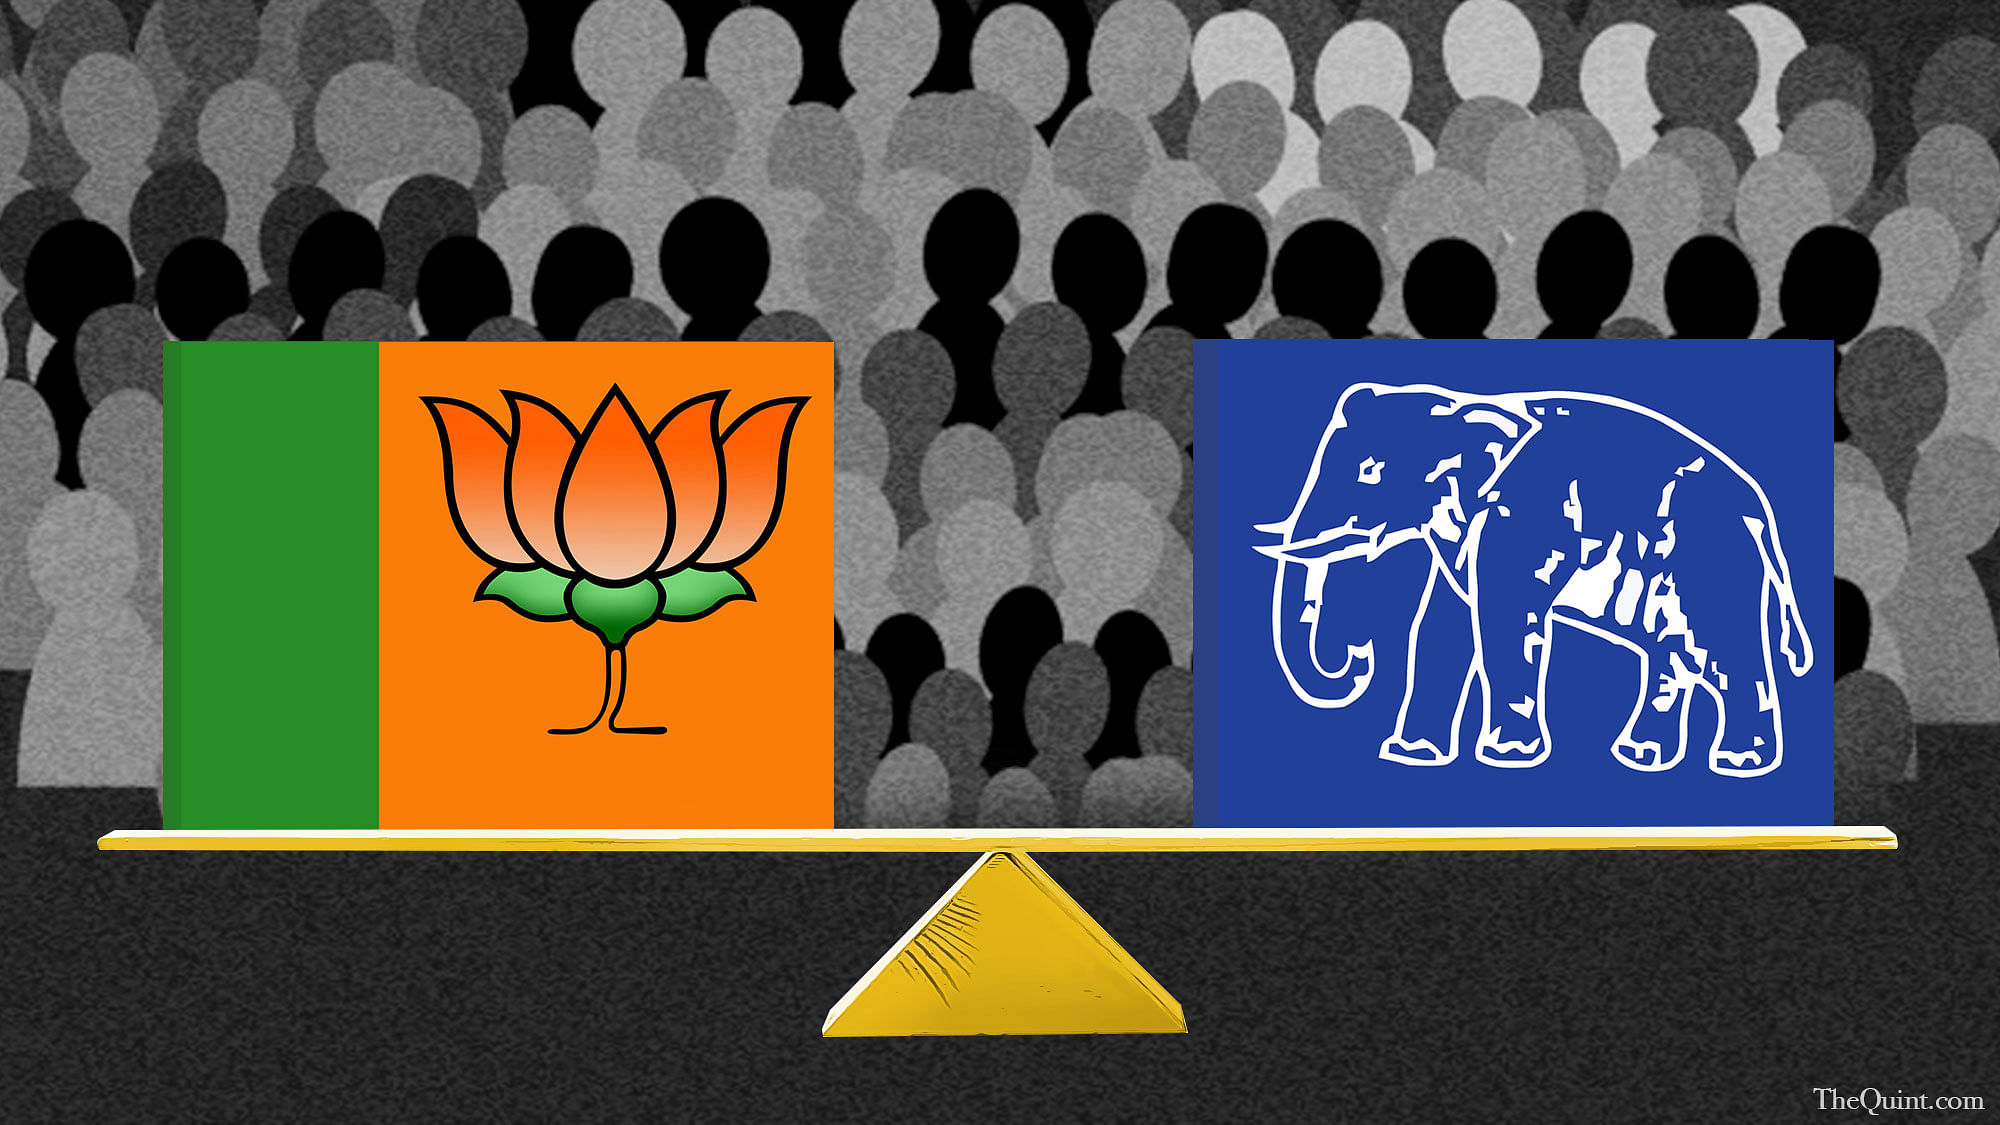 The BJP and the BSP battle it out in the run-up to the state Assembly elections. (Photo: The Quint)